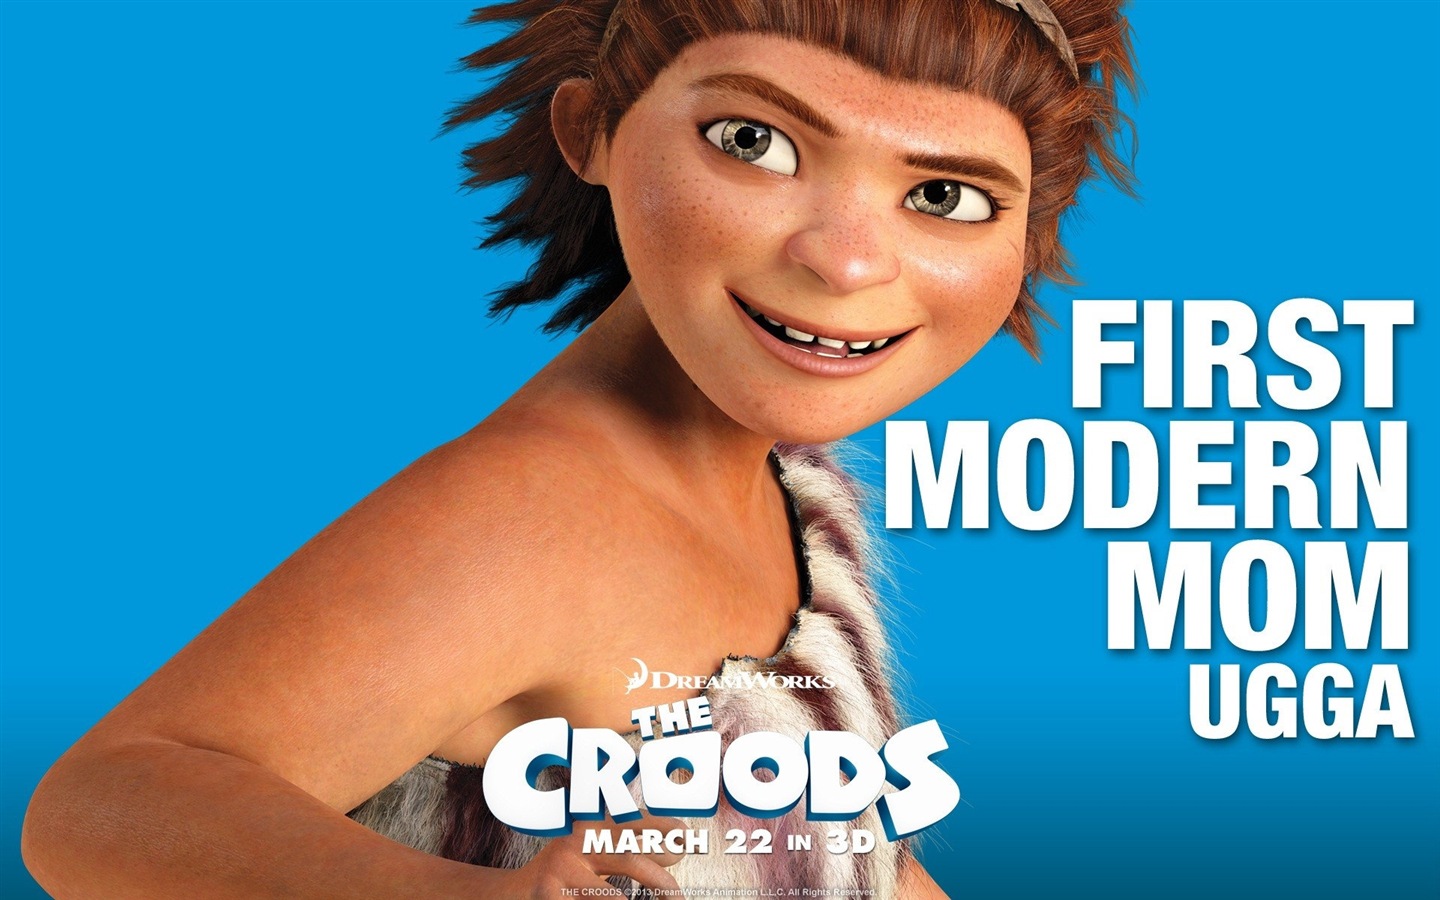 V Croods HD Movie Wallpapers #7 - 1440x900